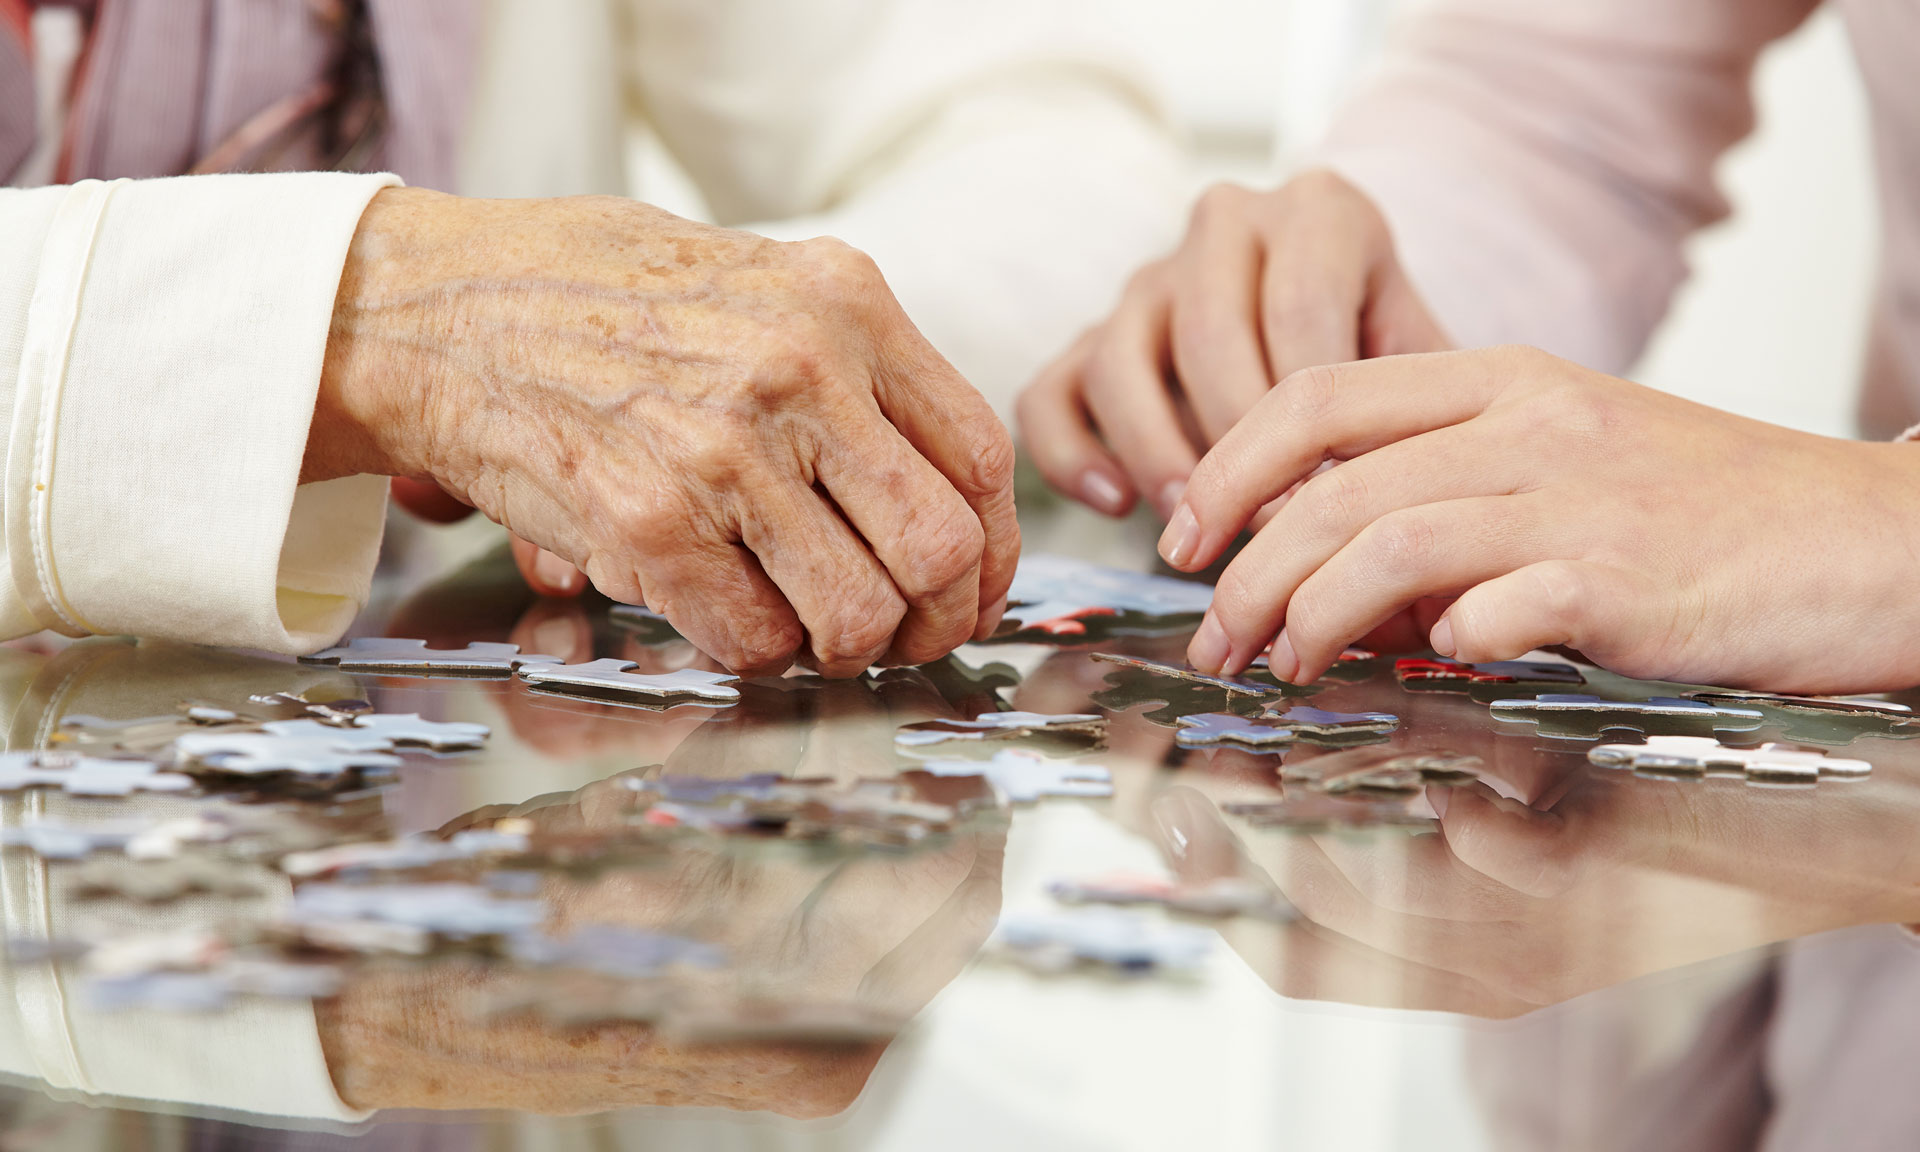 How to care for people with dementia